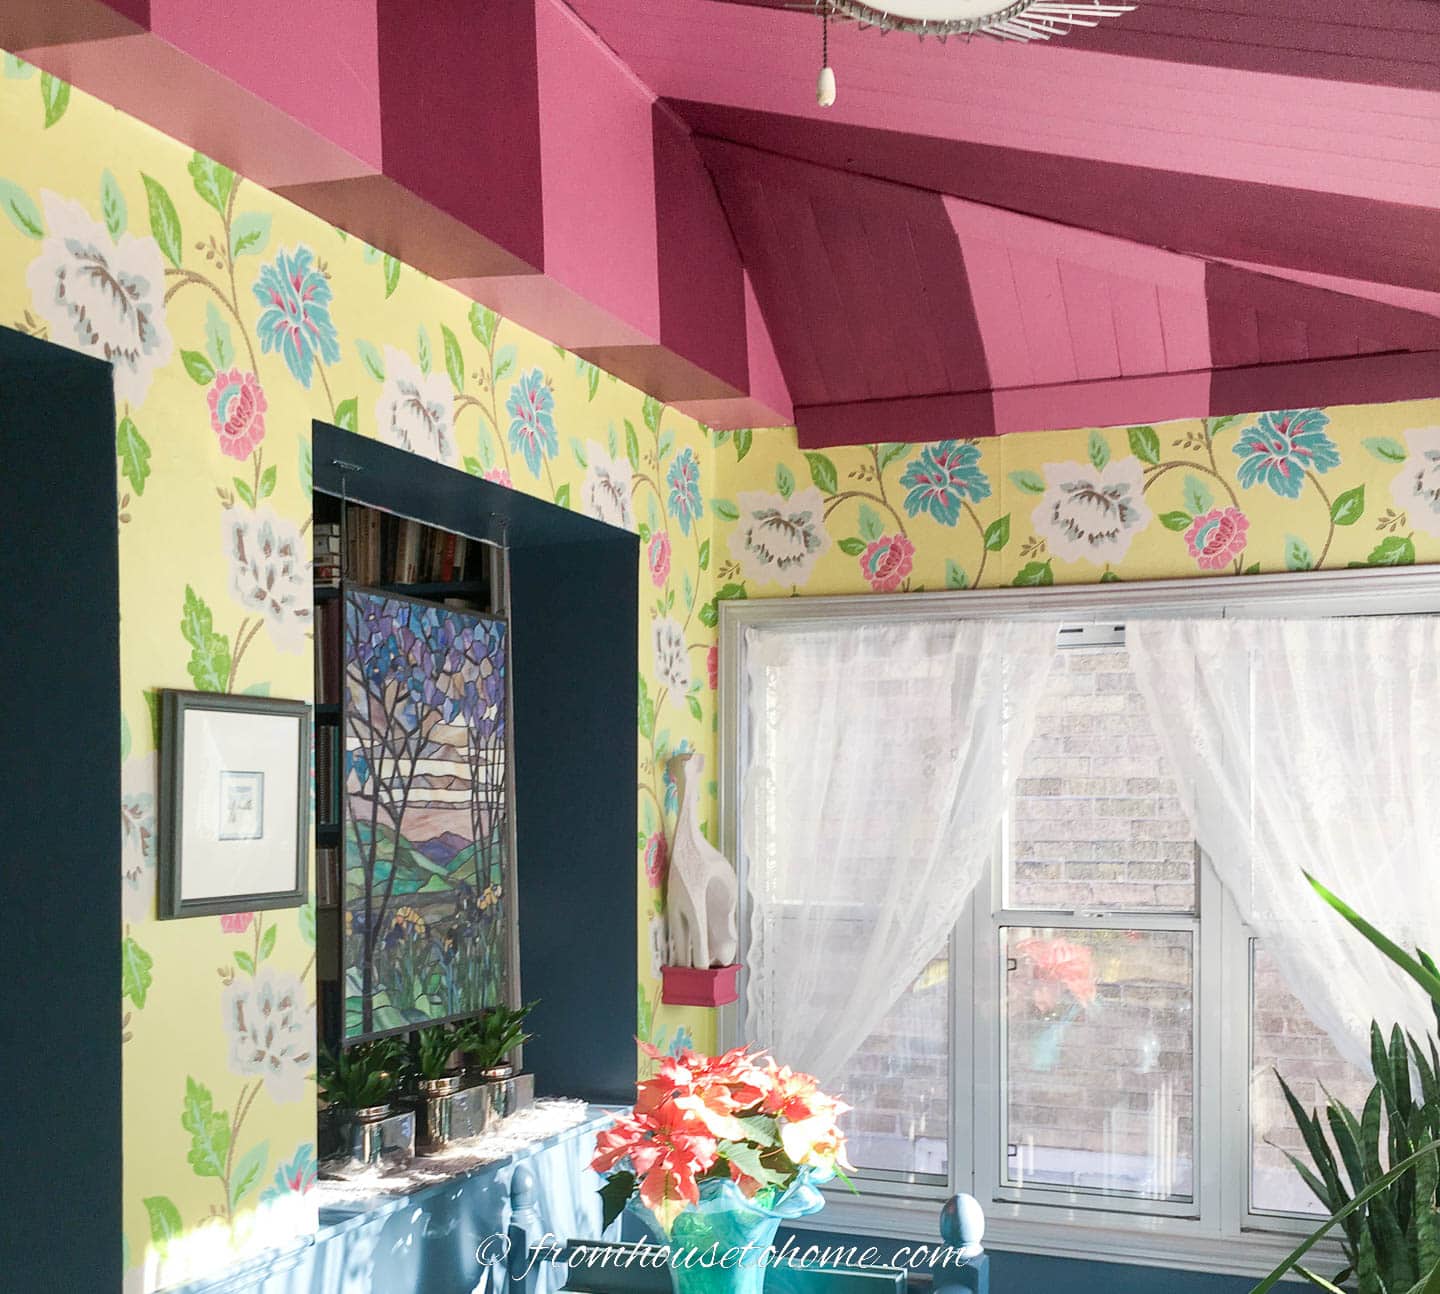 walls covered in yellow, blue and pink floral wallpaper and a pink striped ceiling